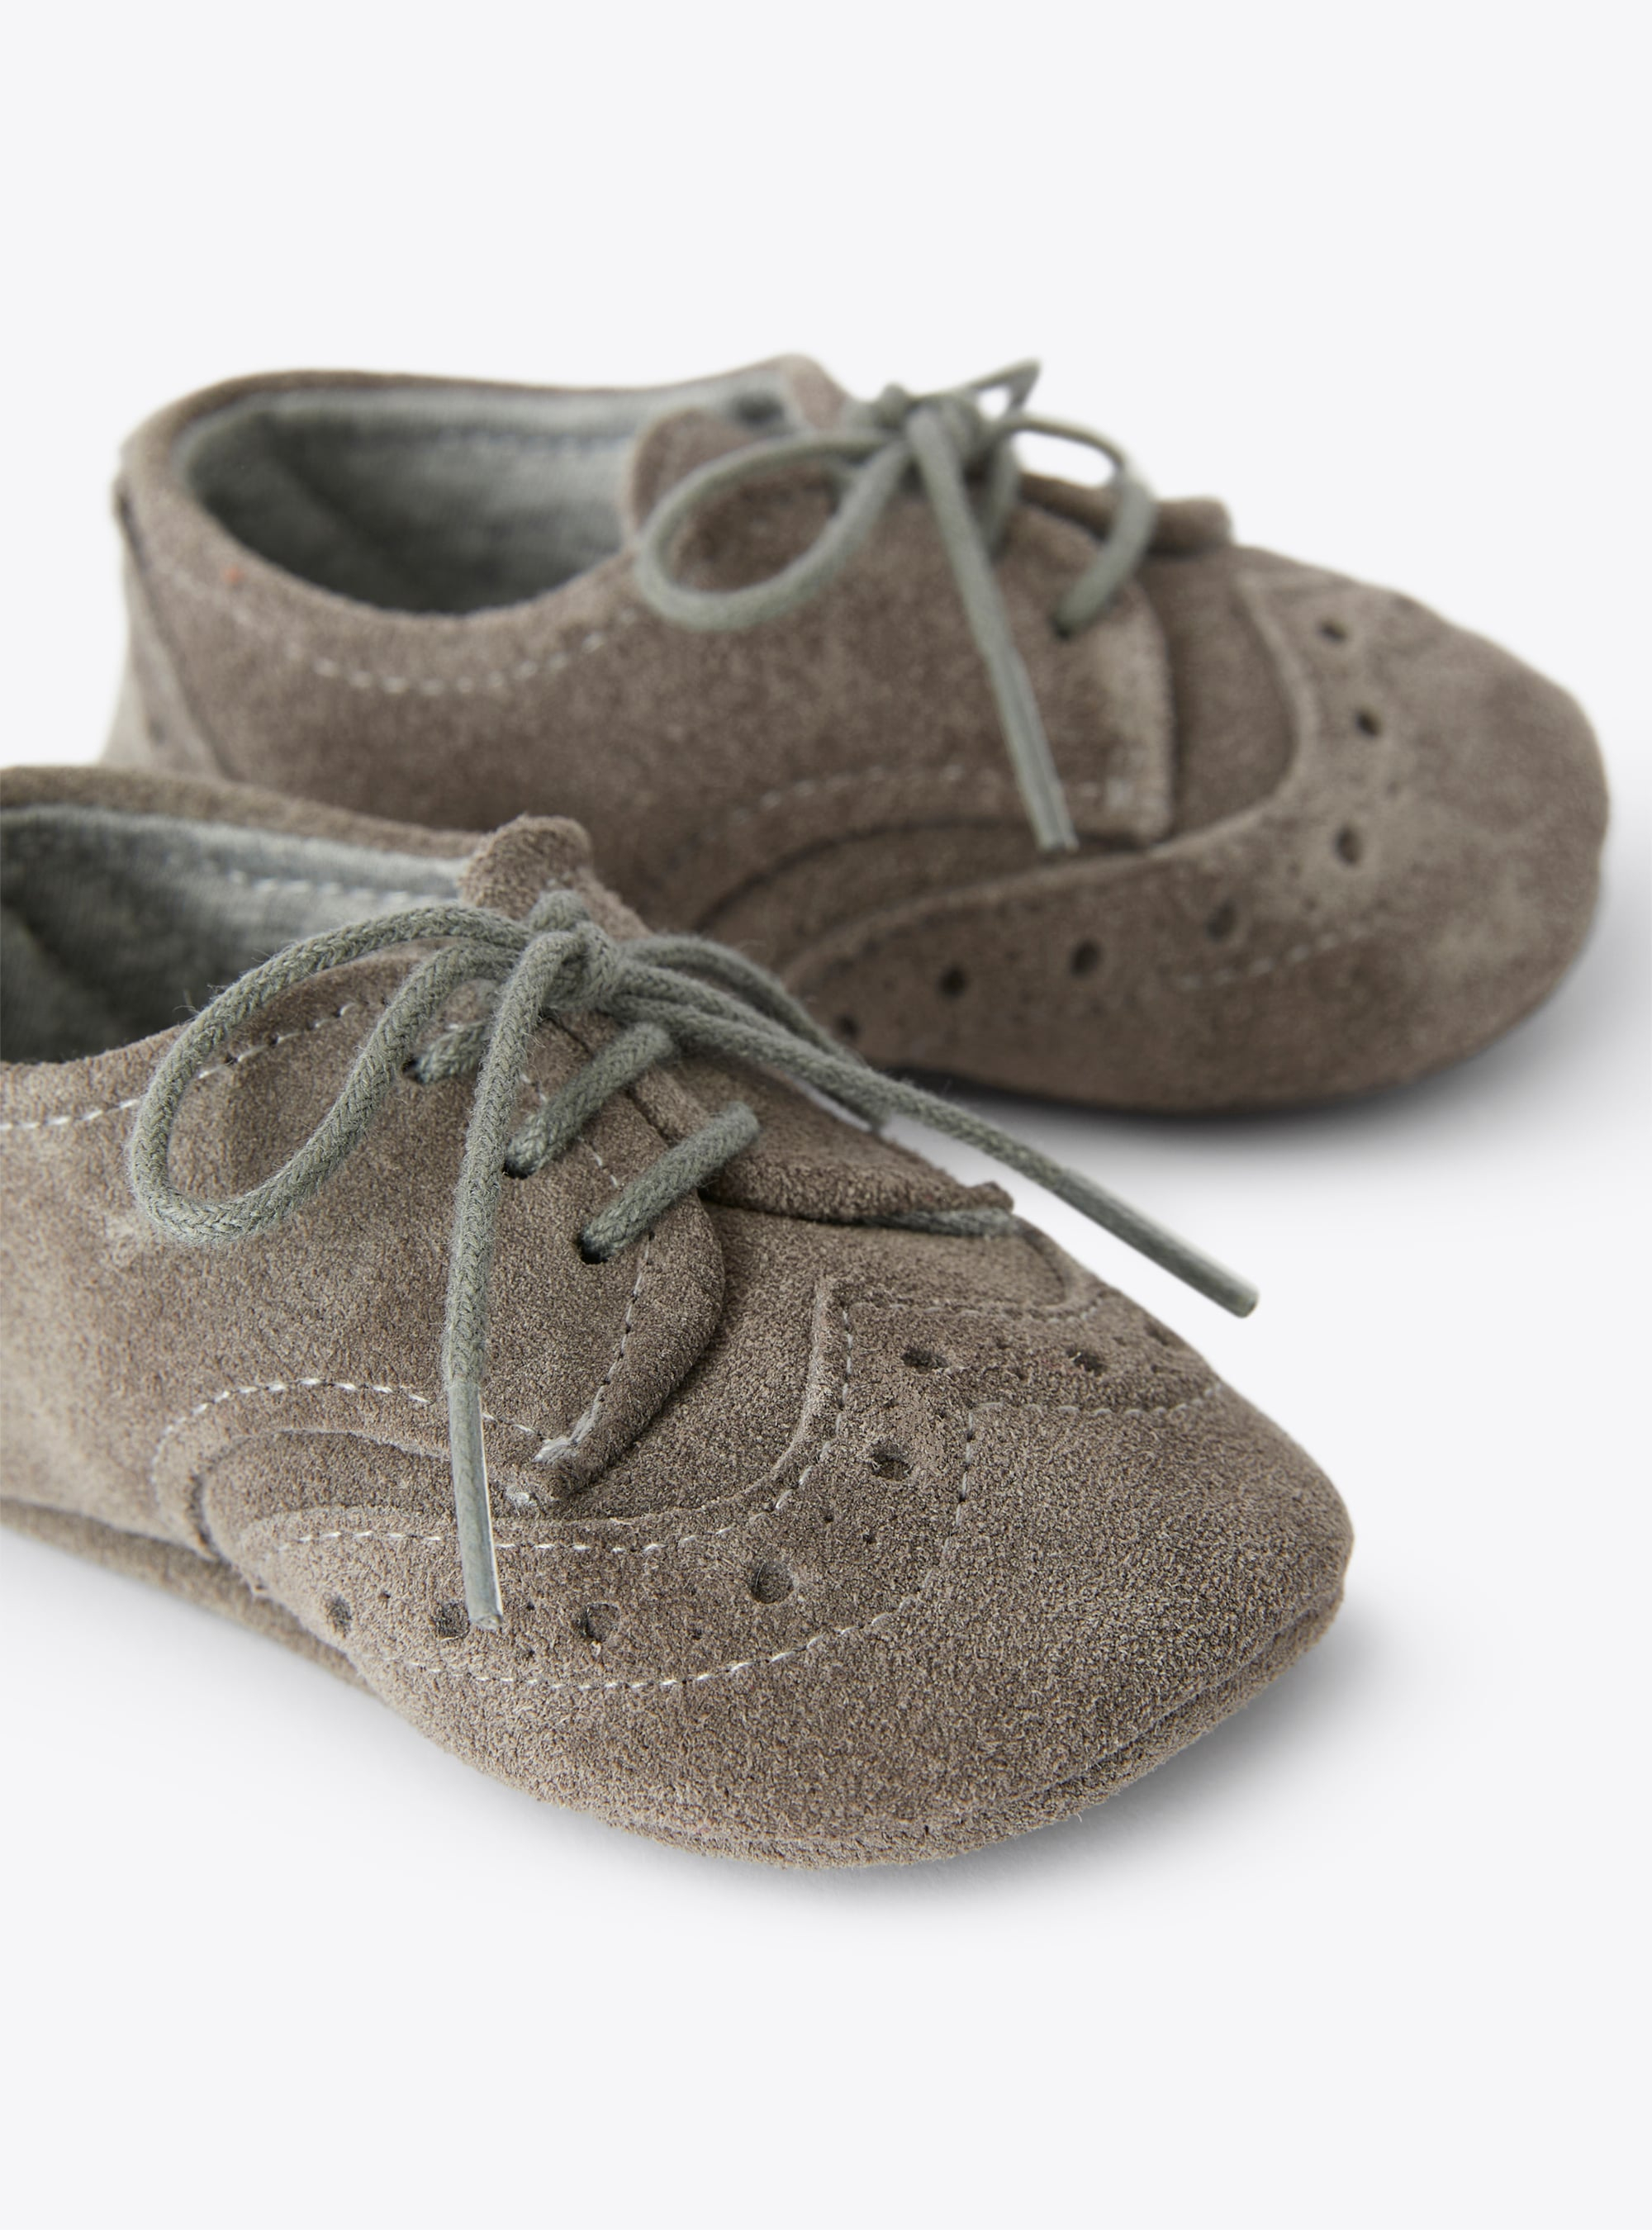 Baby suede lace-up shoes - Grey | Il Gufo